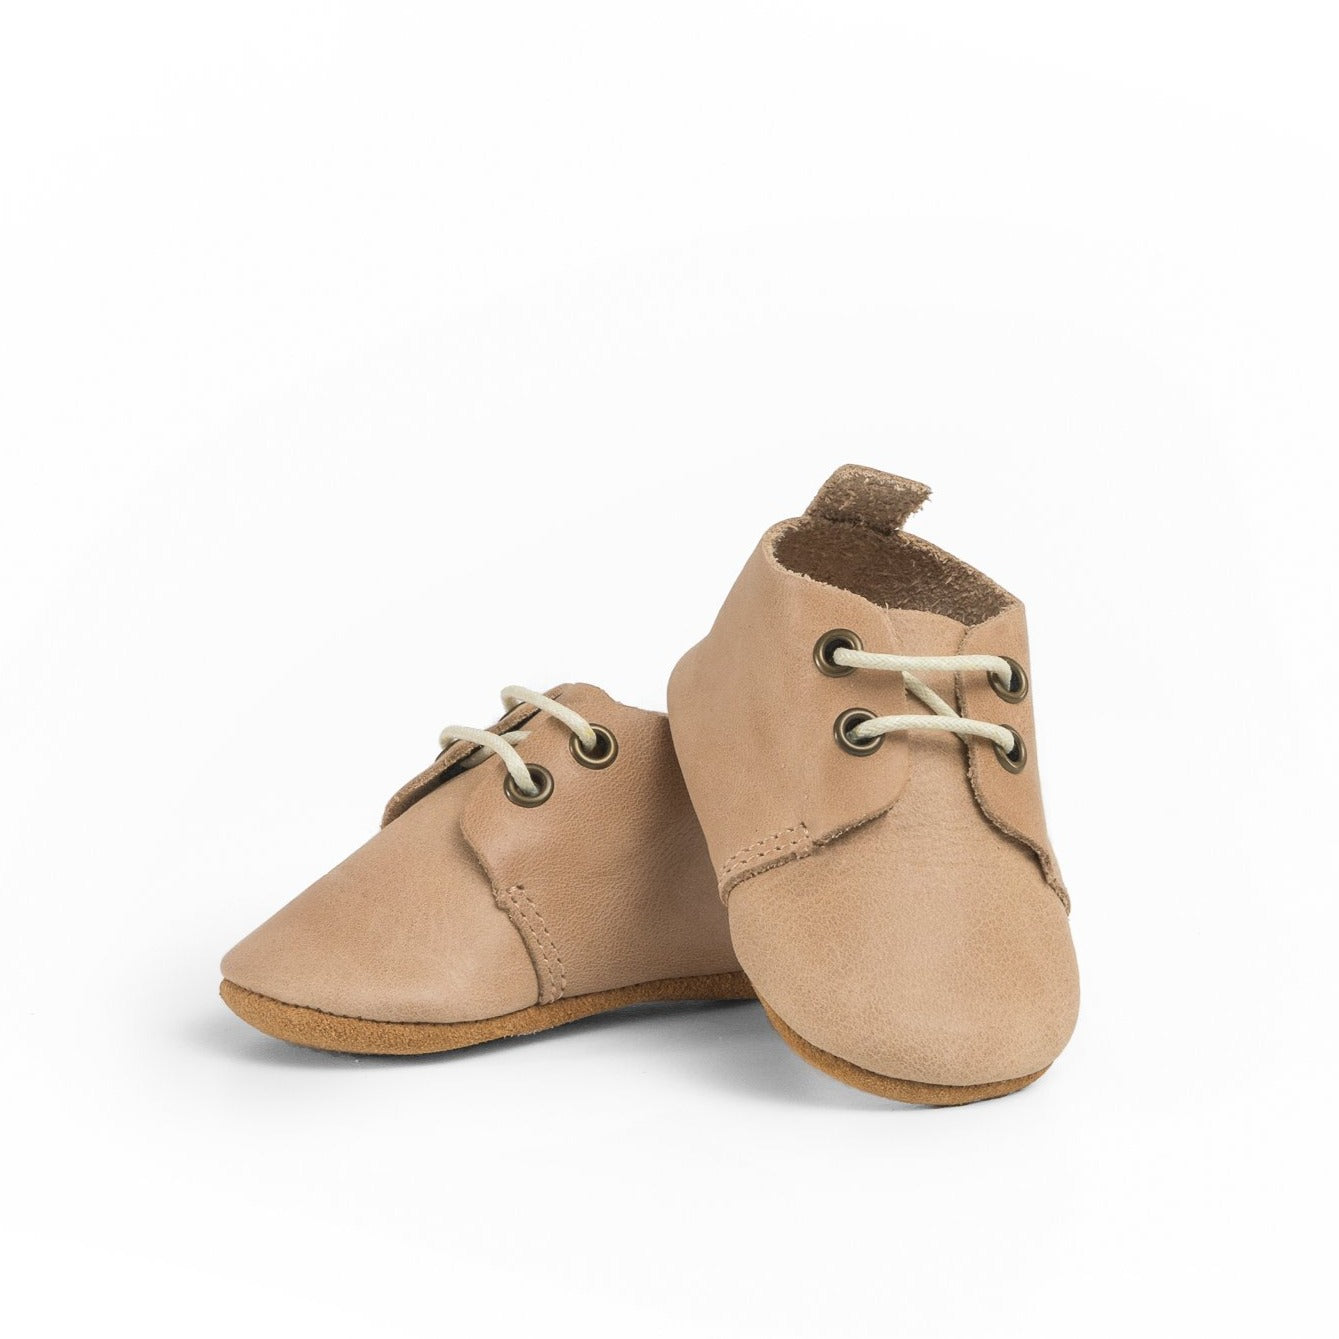 Tan - Low Top Oxfords - Soft Sole